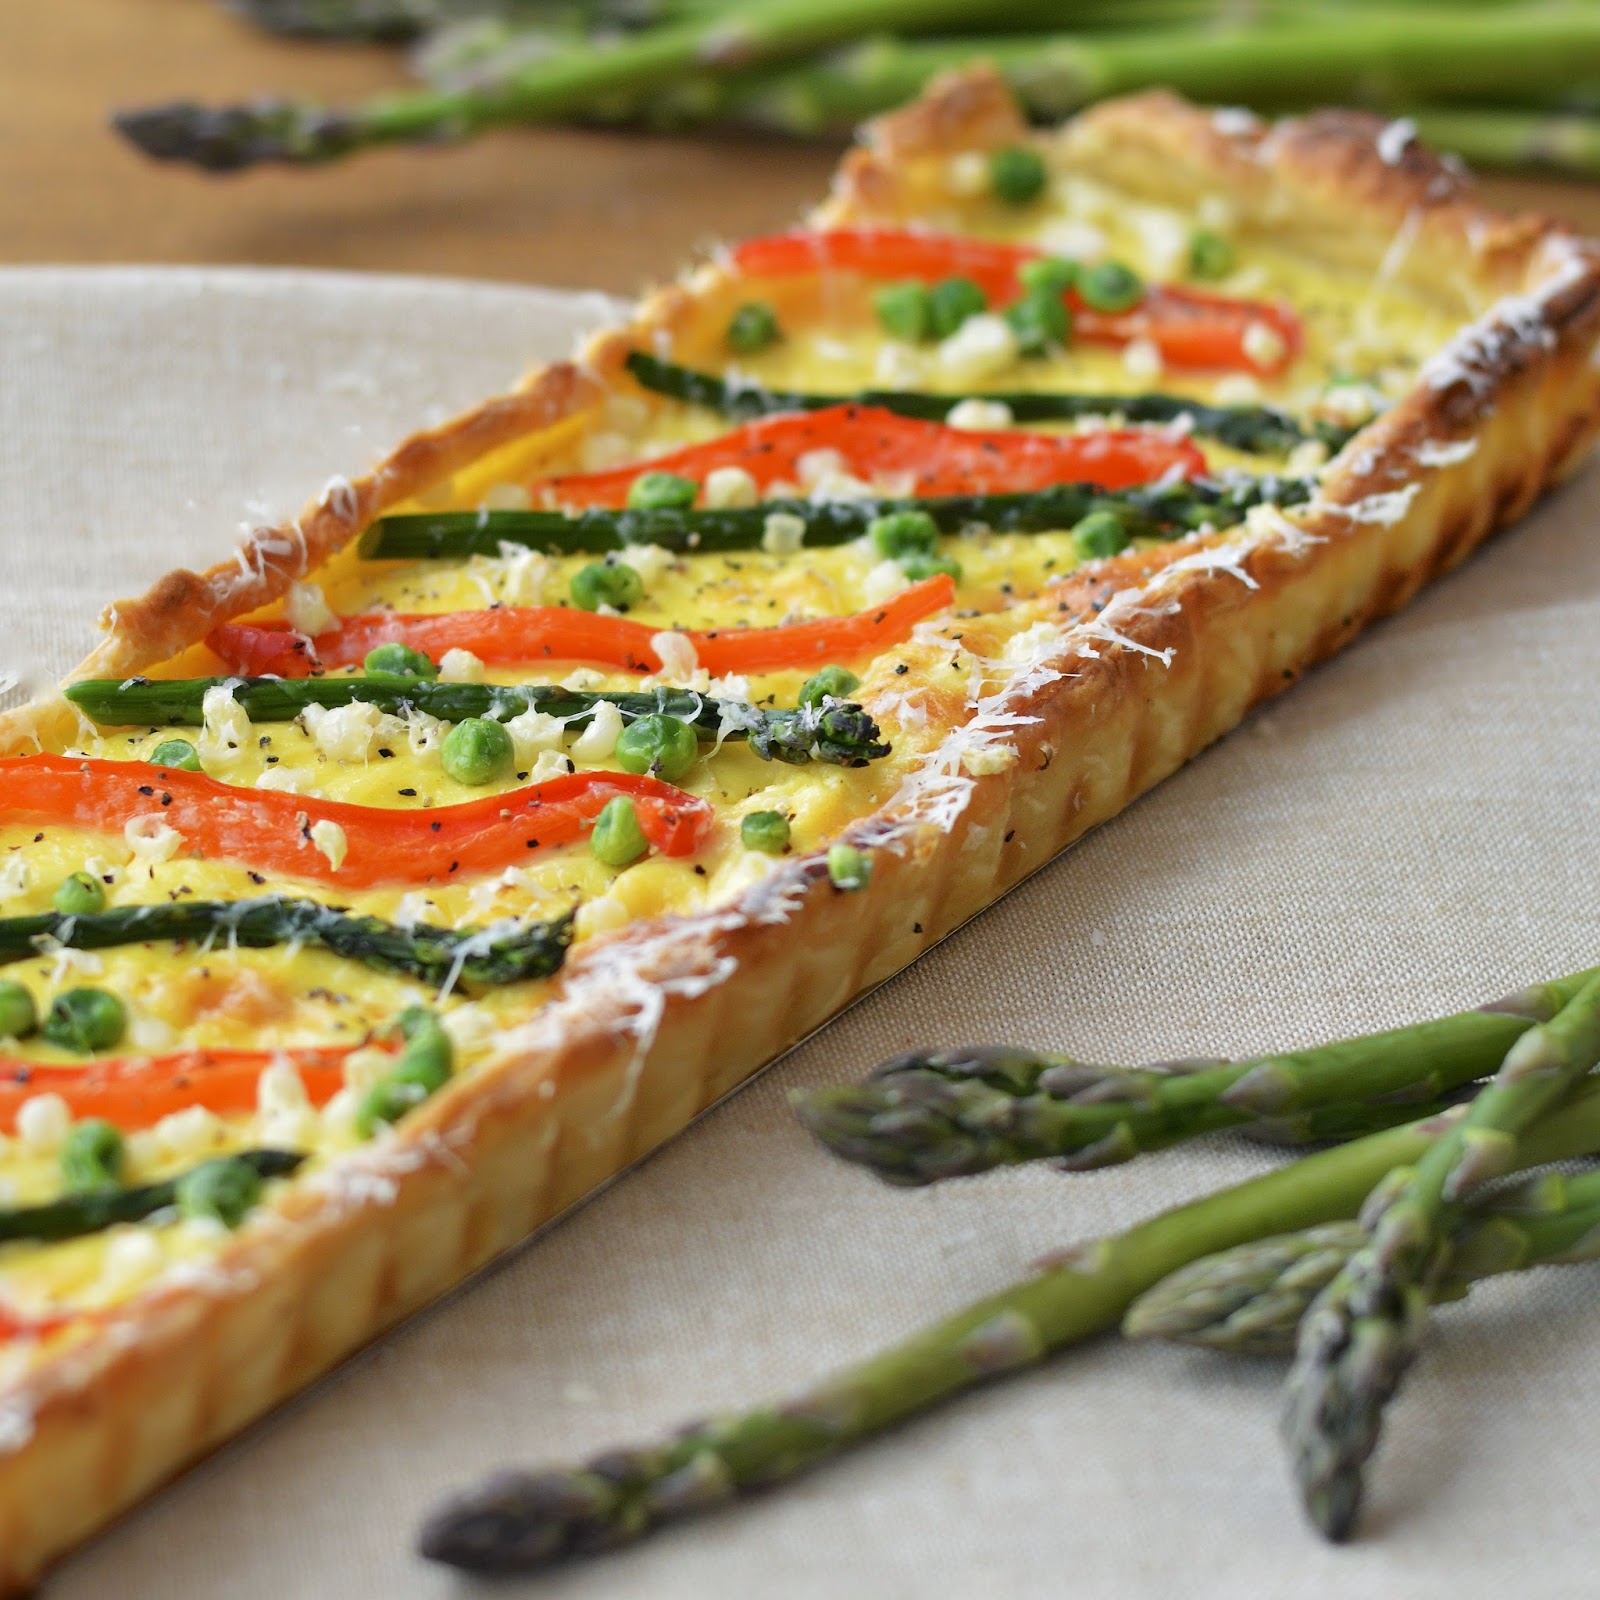 This spring vegetable tart is made with greek yogurt and fresh veggies. It's perfect for dinner with crusty French bread and an arugula salad | Virtually Homemade